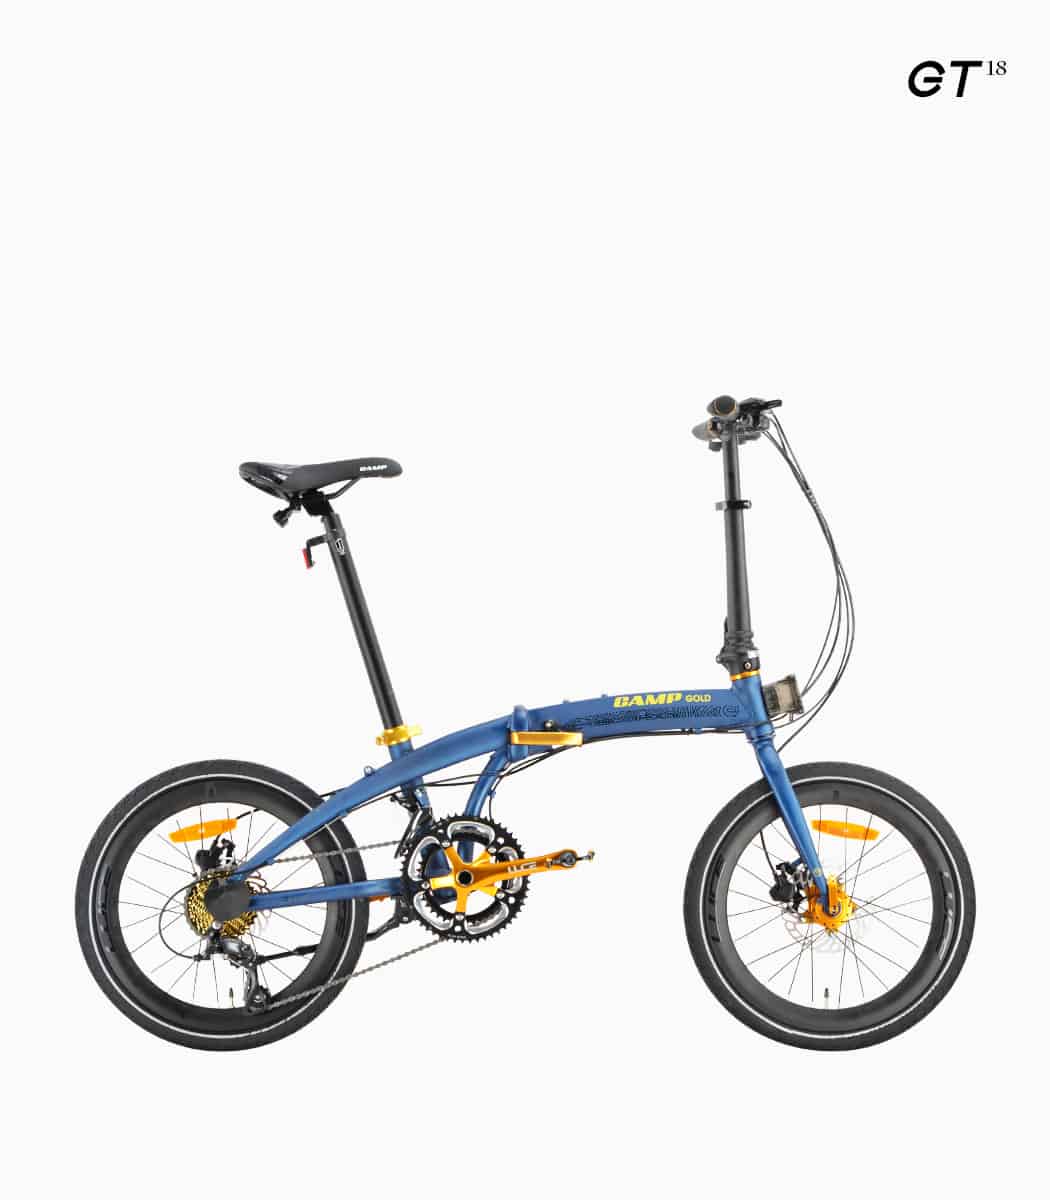 CAMP GOLD GT (BLUE) foldable bicycle right (SHIMANO Sora 18)